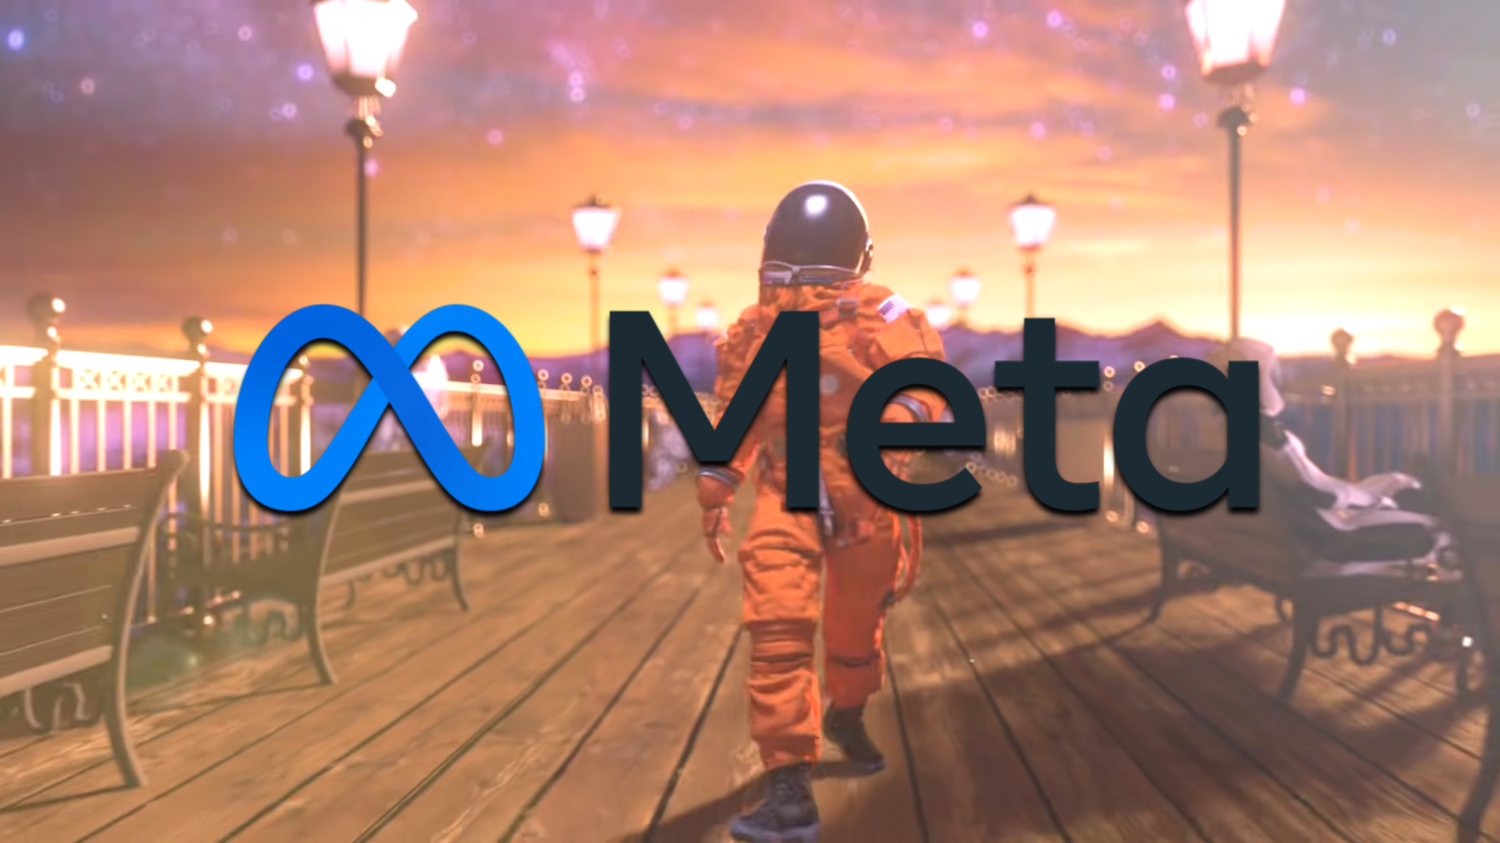 Meta Reality Labs metaverse division has lost 18 billion since 2020